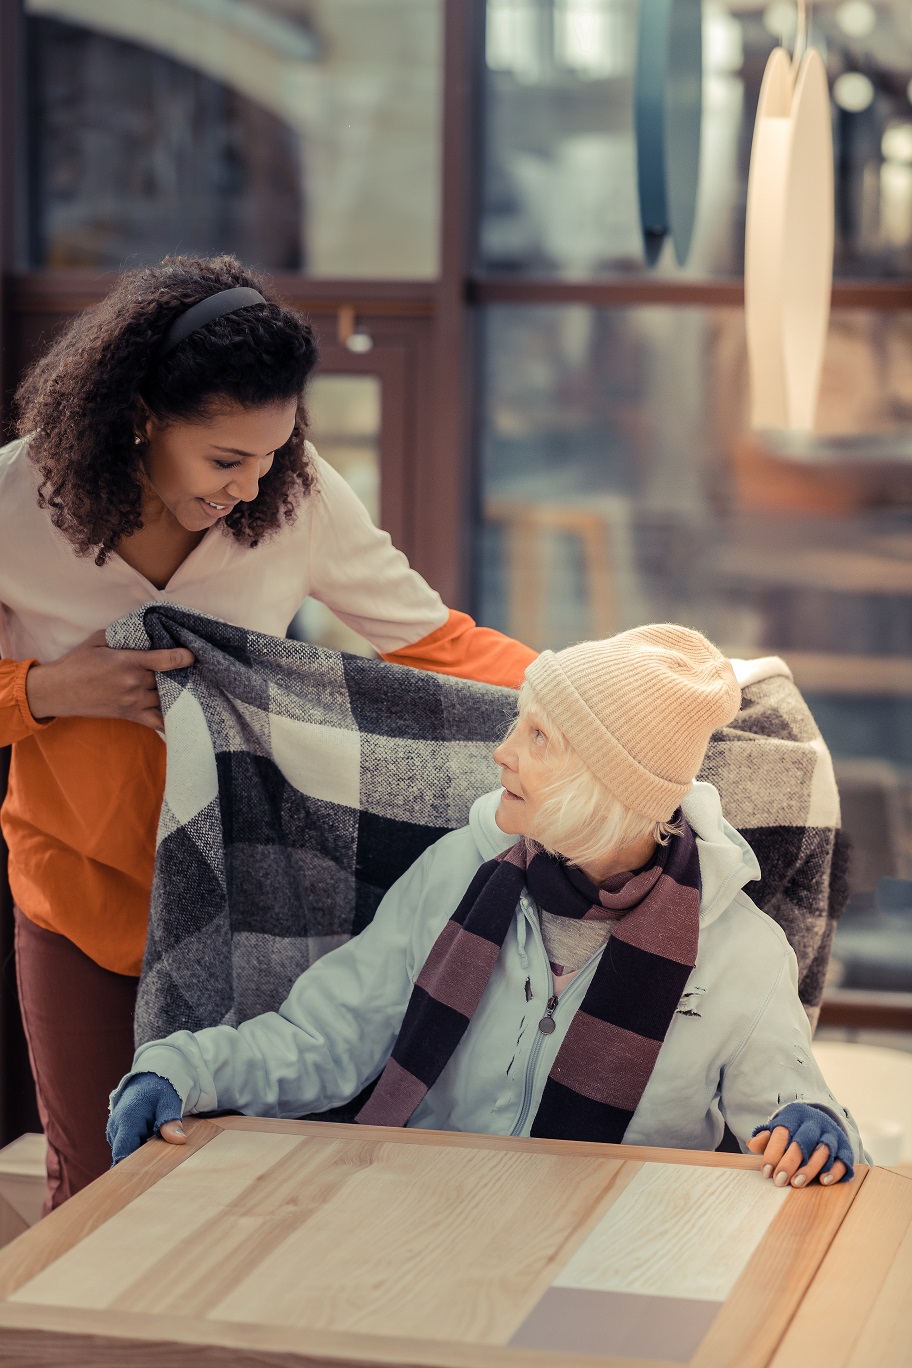 Caregiver covering elderly woman with a blanket